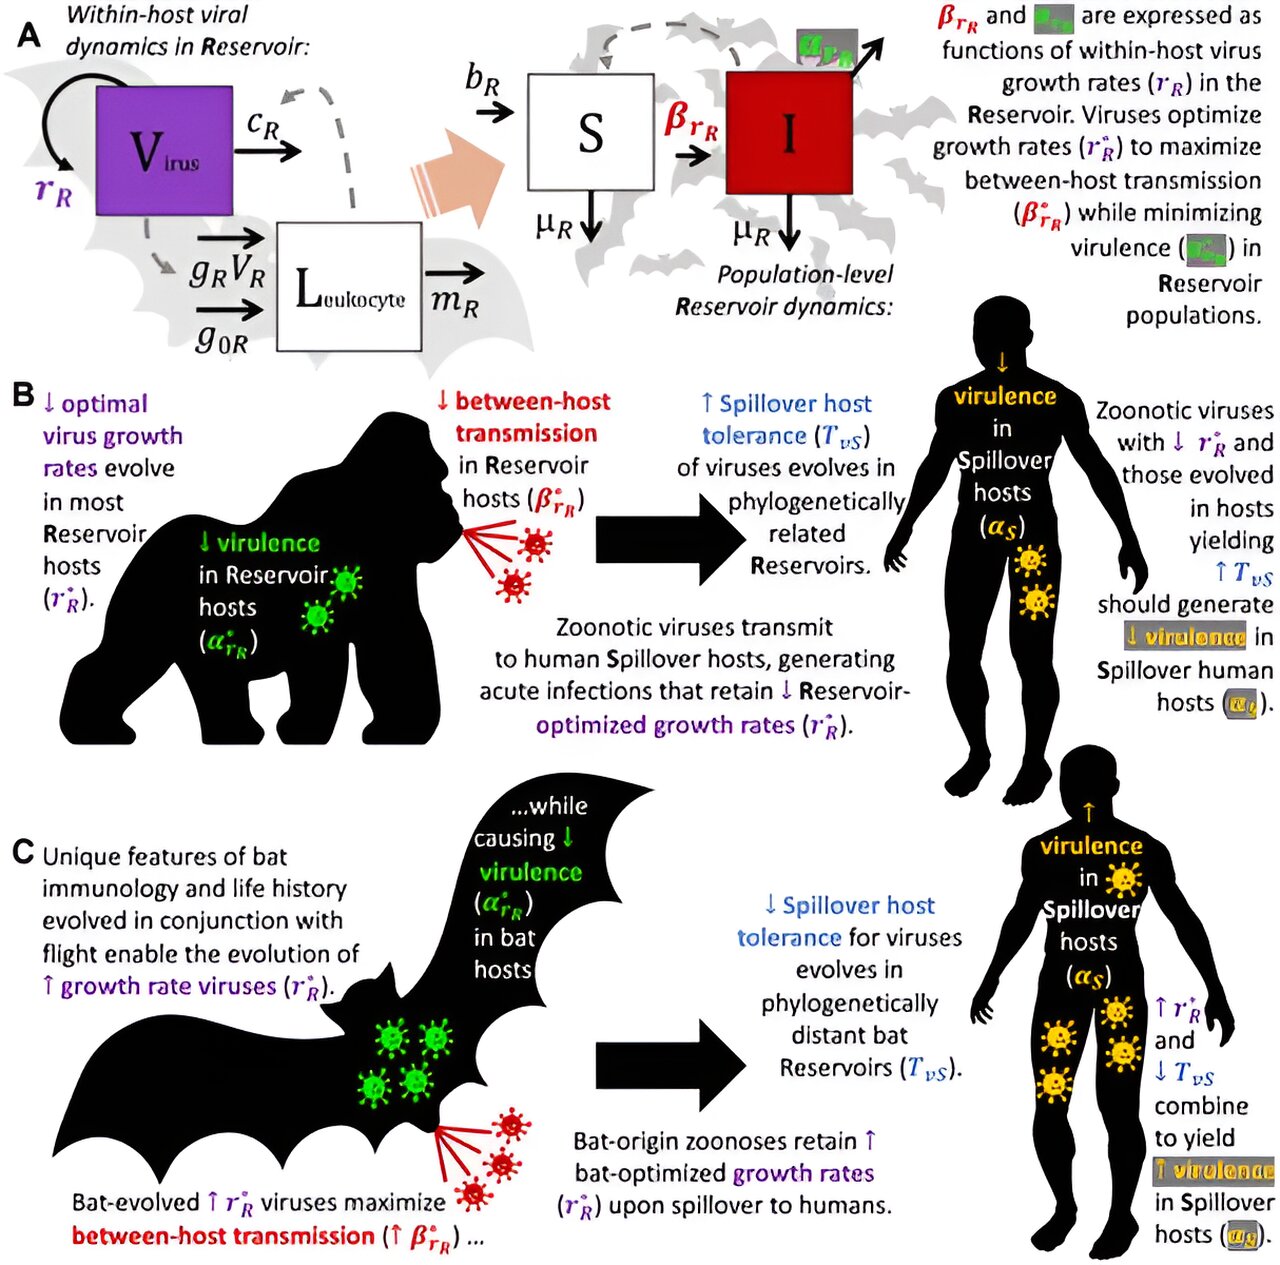 How studying bat viruses can help prevent zoonotic disease